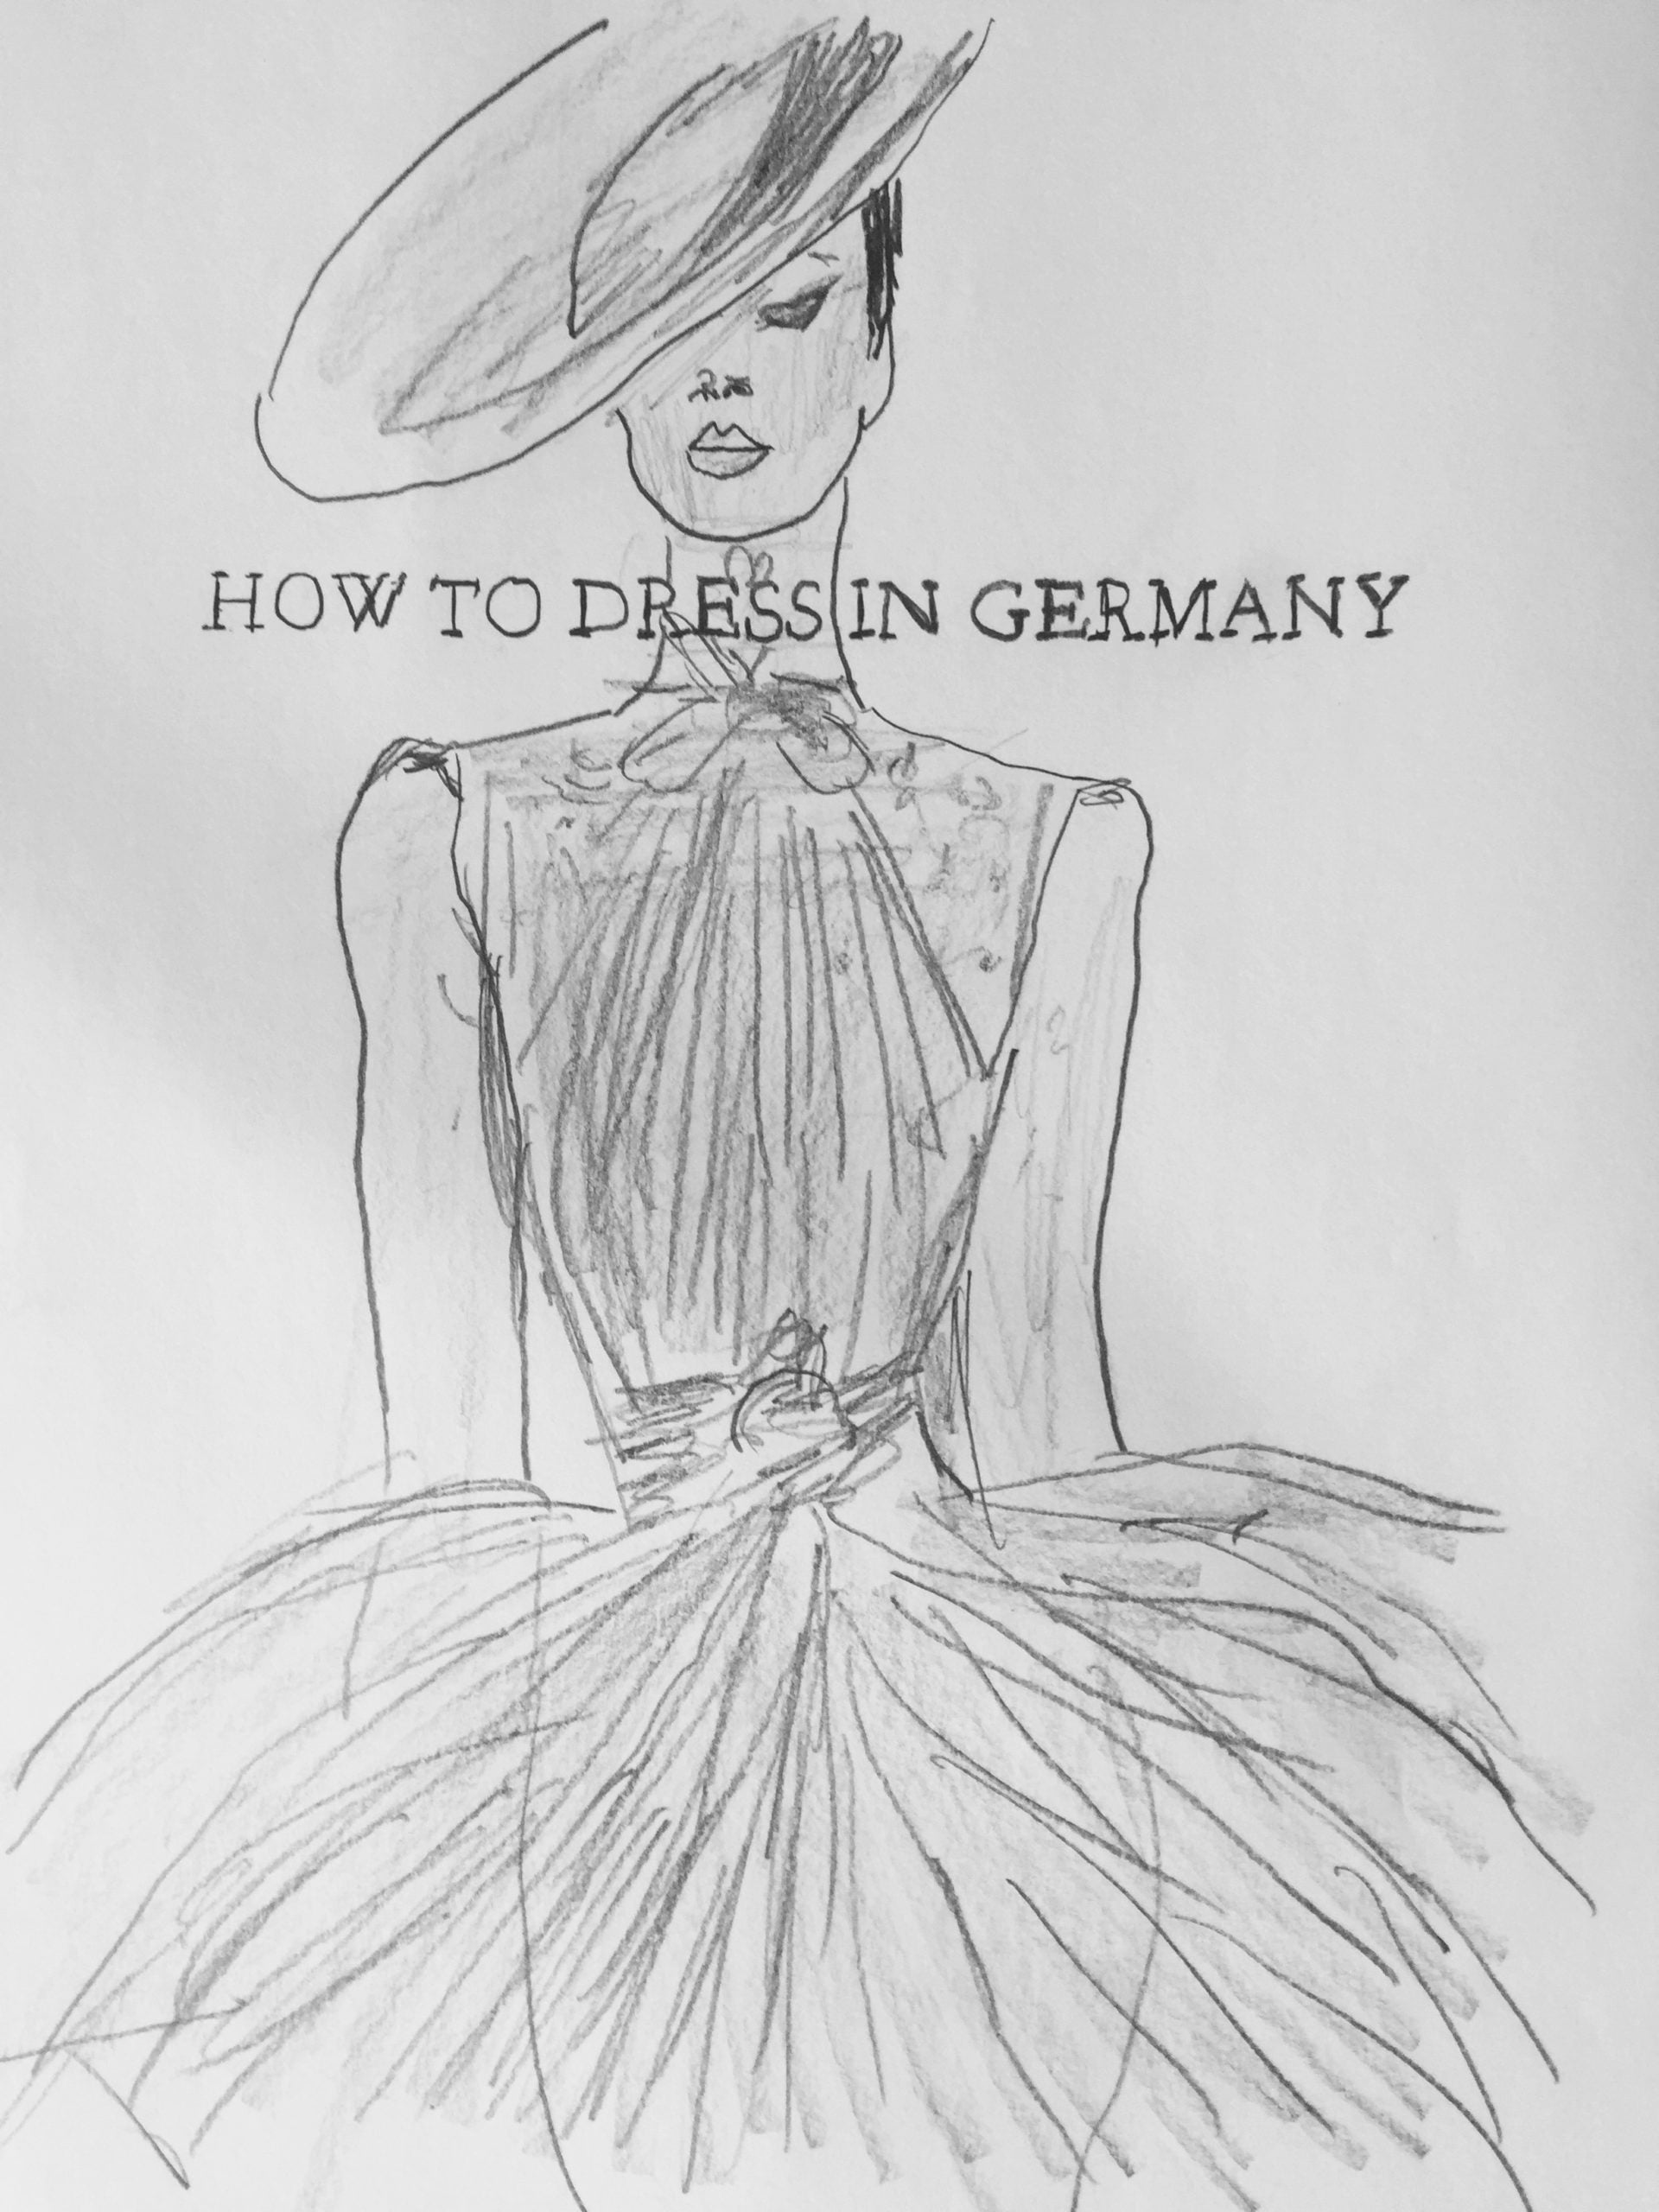 Teil 3: How to dress in Germany